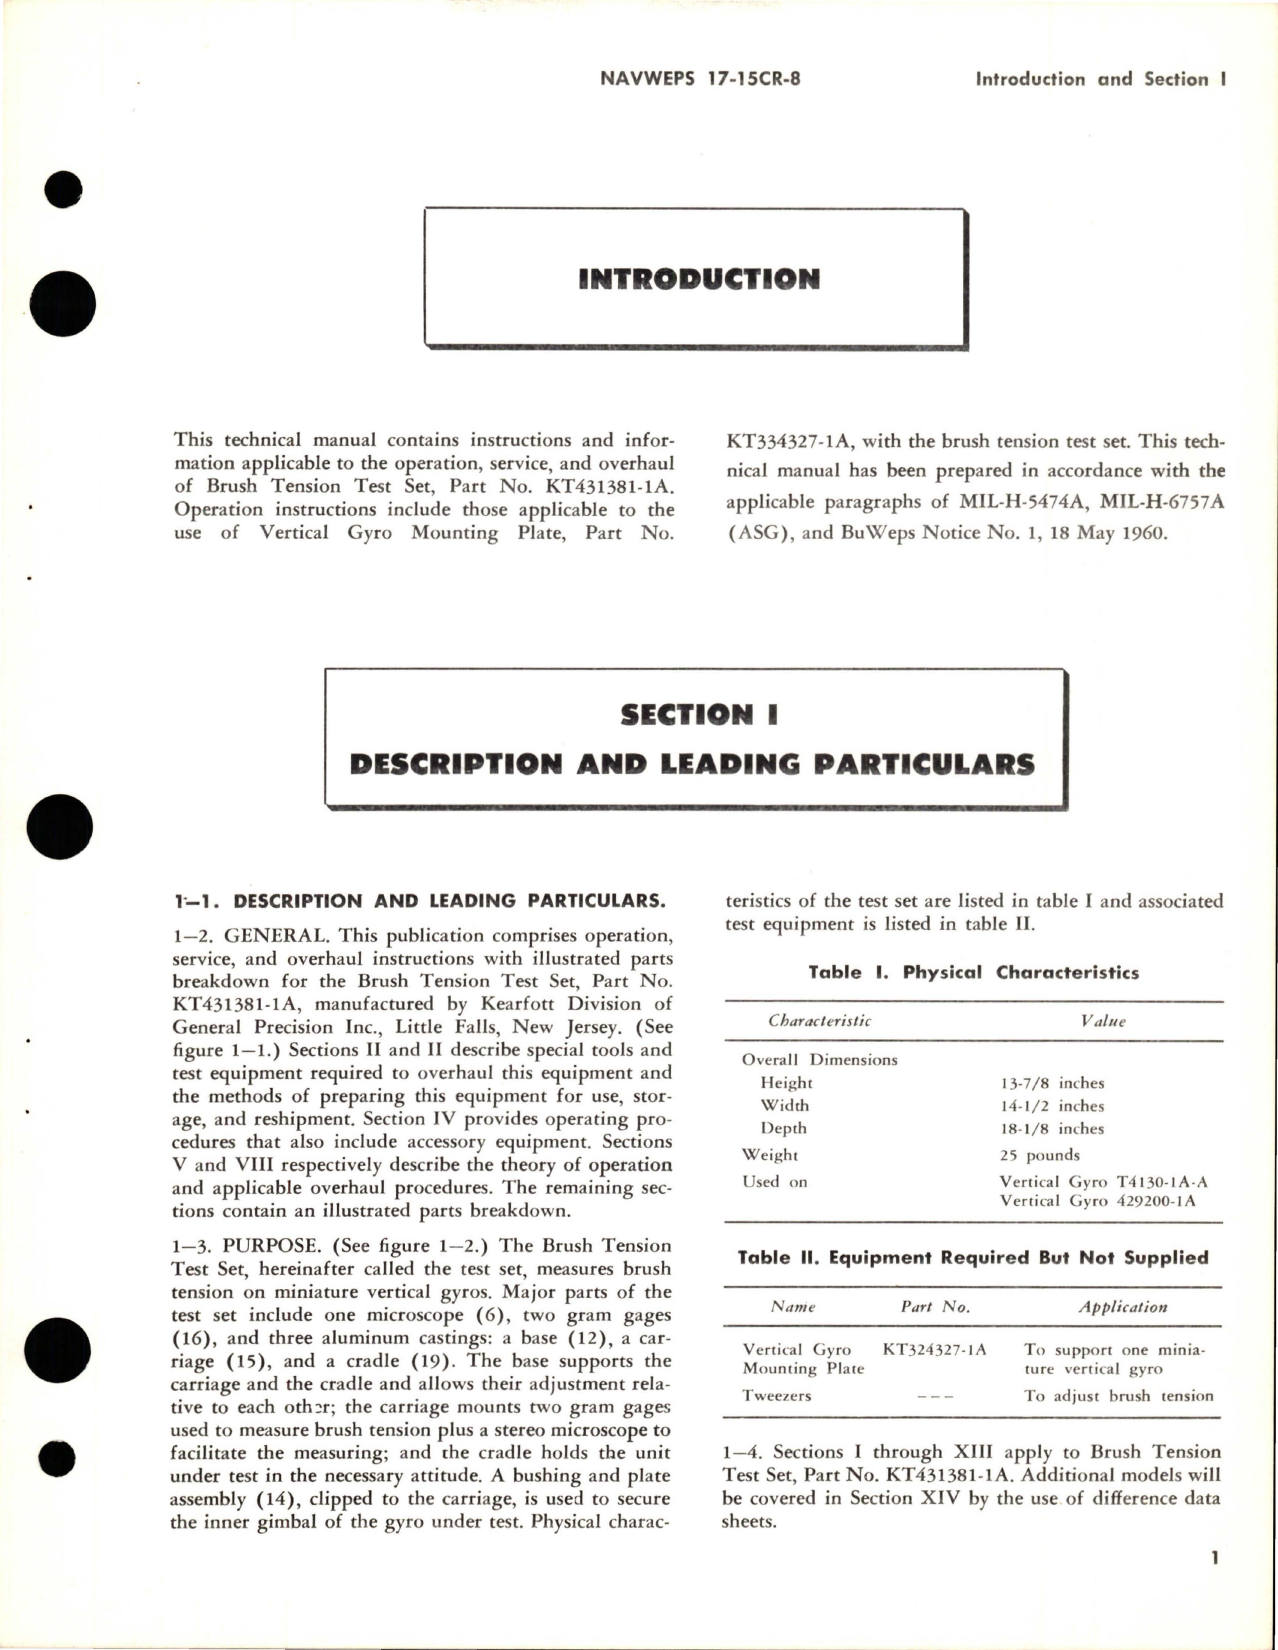 Sample page 5 from AirCorps Library document: Operation, Service Instructions and Illustrated Parts Breakdown for Brush Tension Test Set - Part KT431381-1A (Kearfott